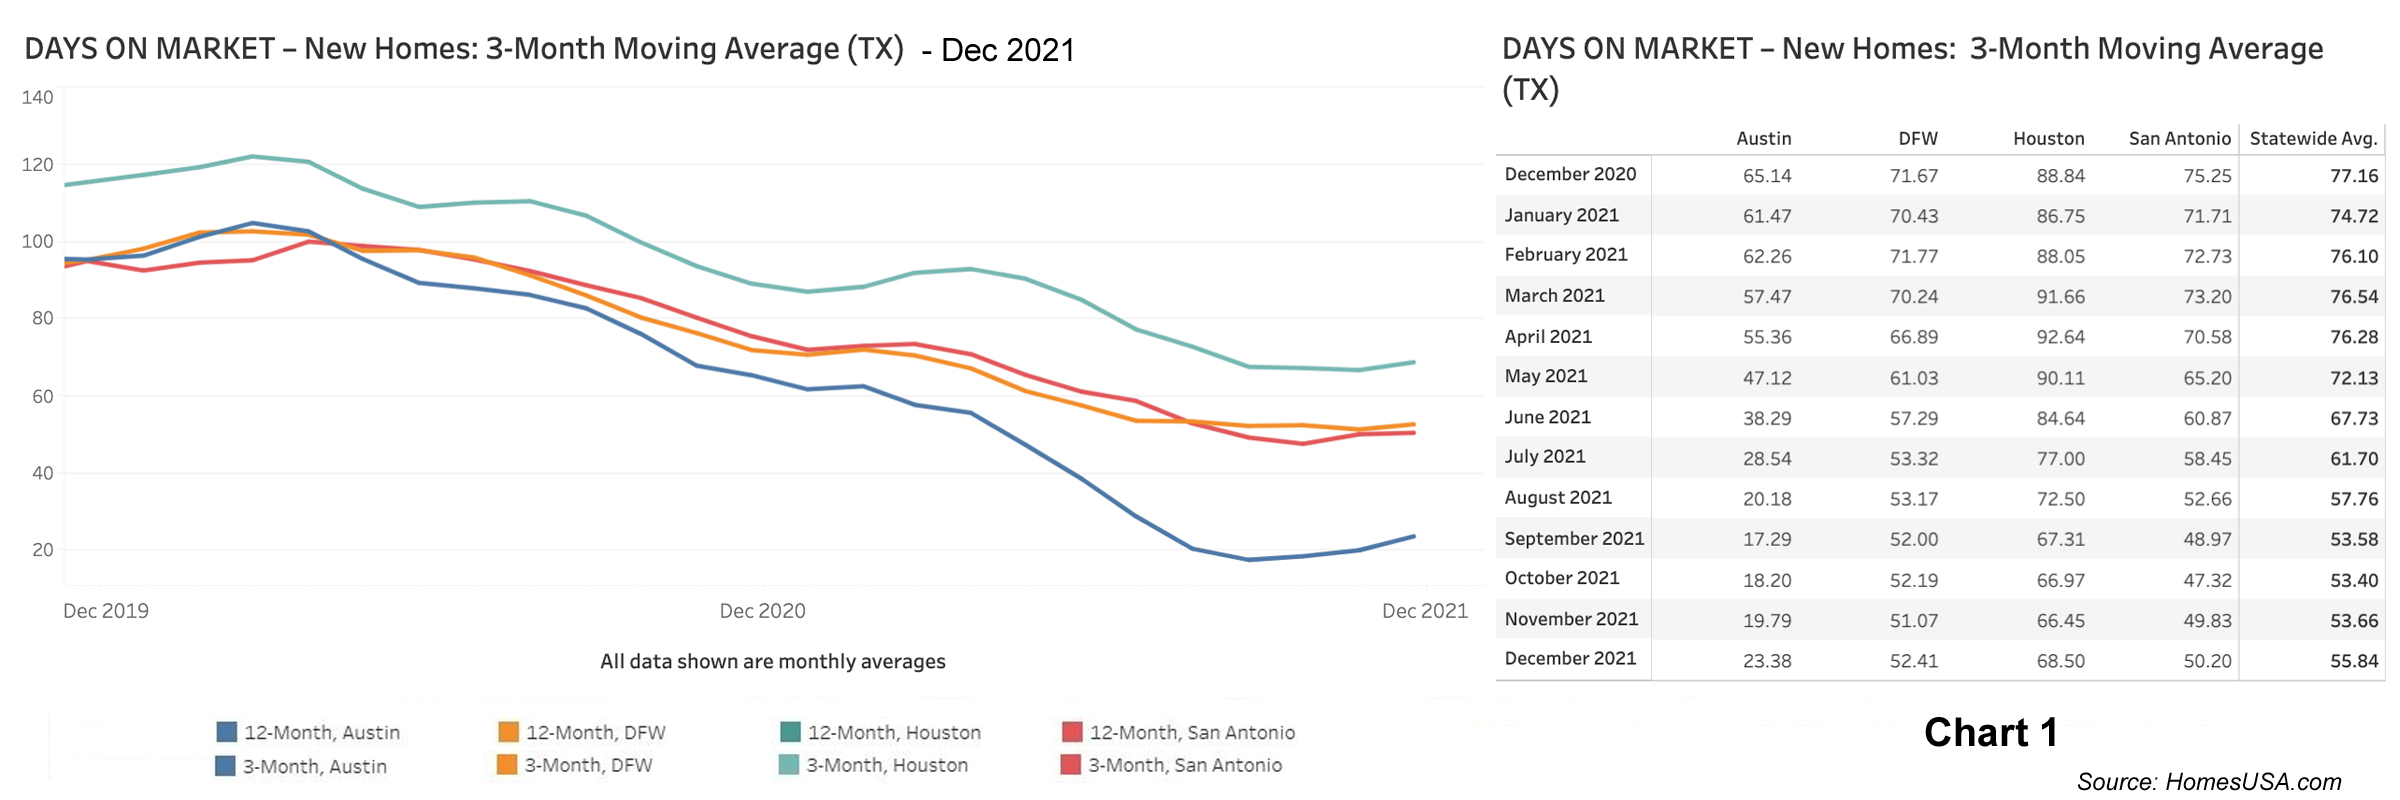 Chart 1: Texas New Homes Tracking - Days on Market – December 2021